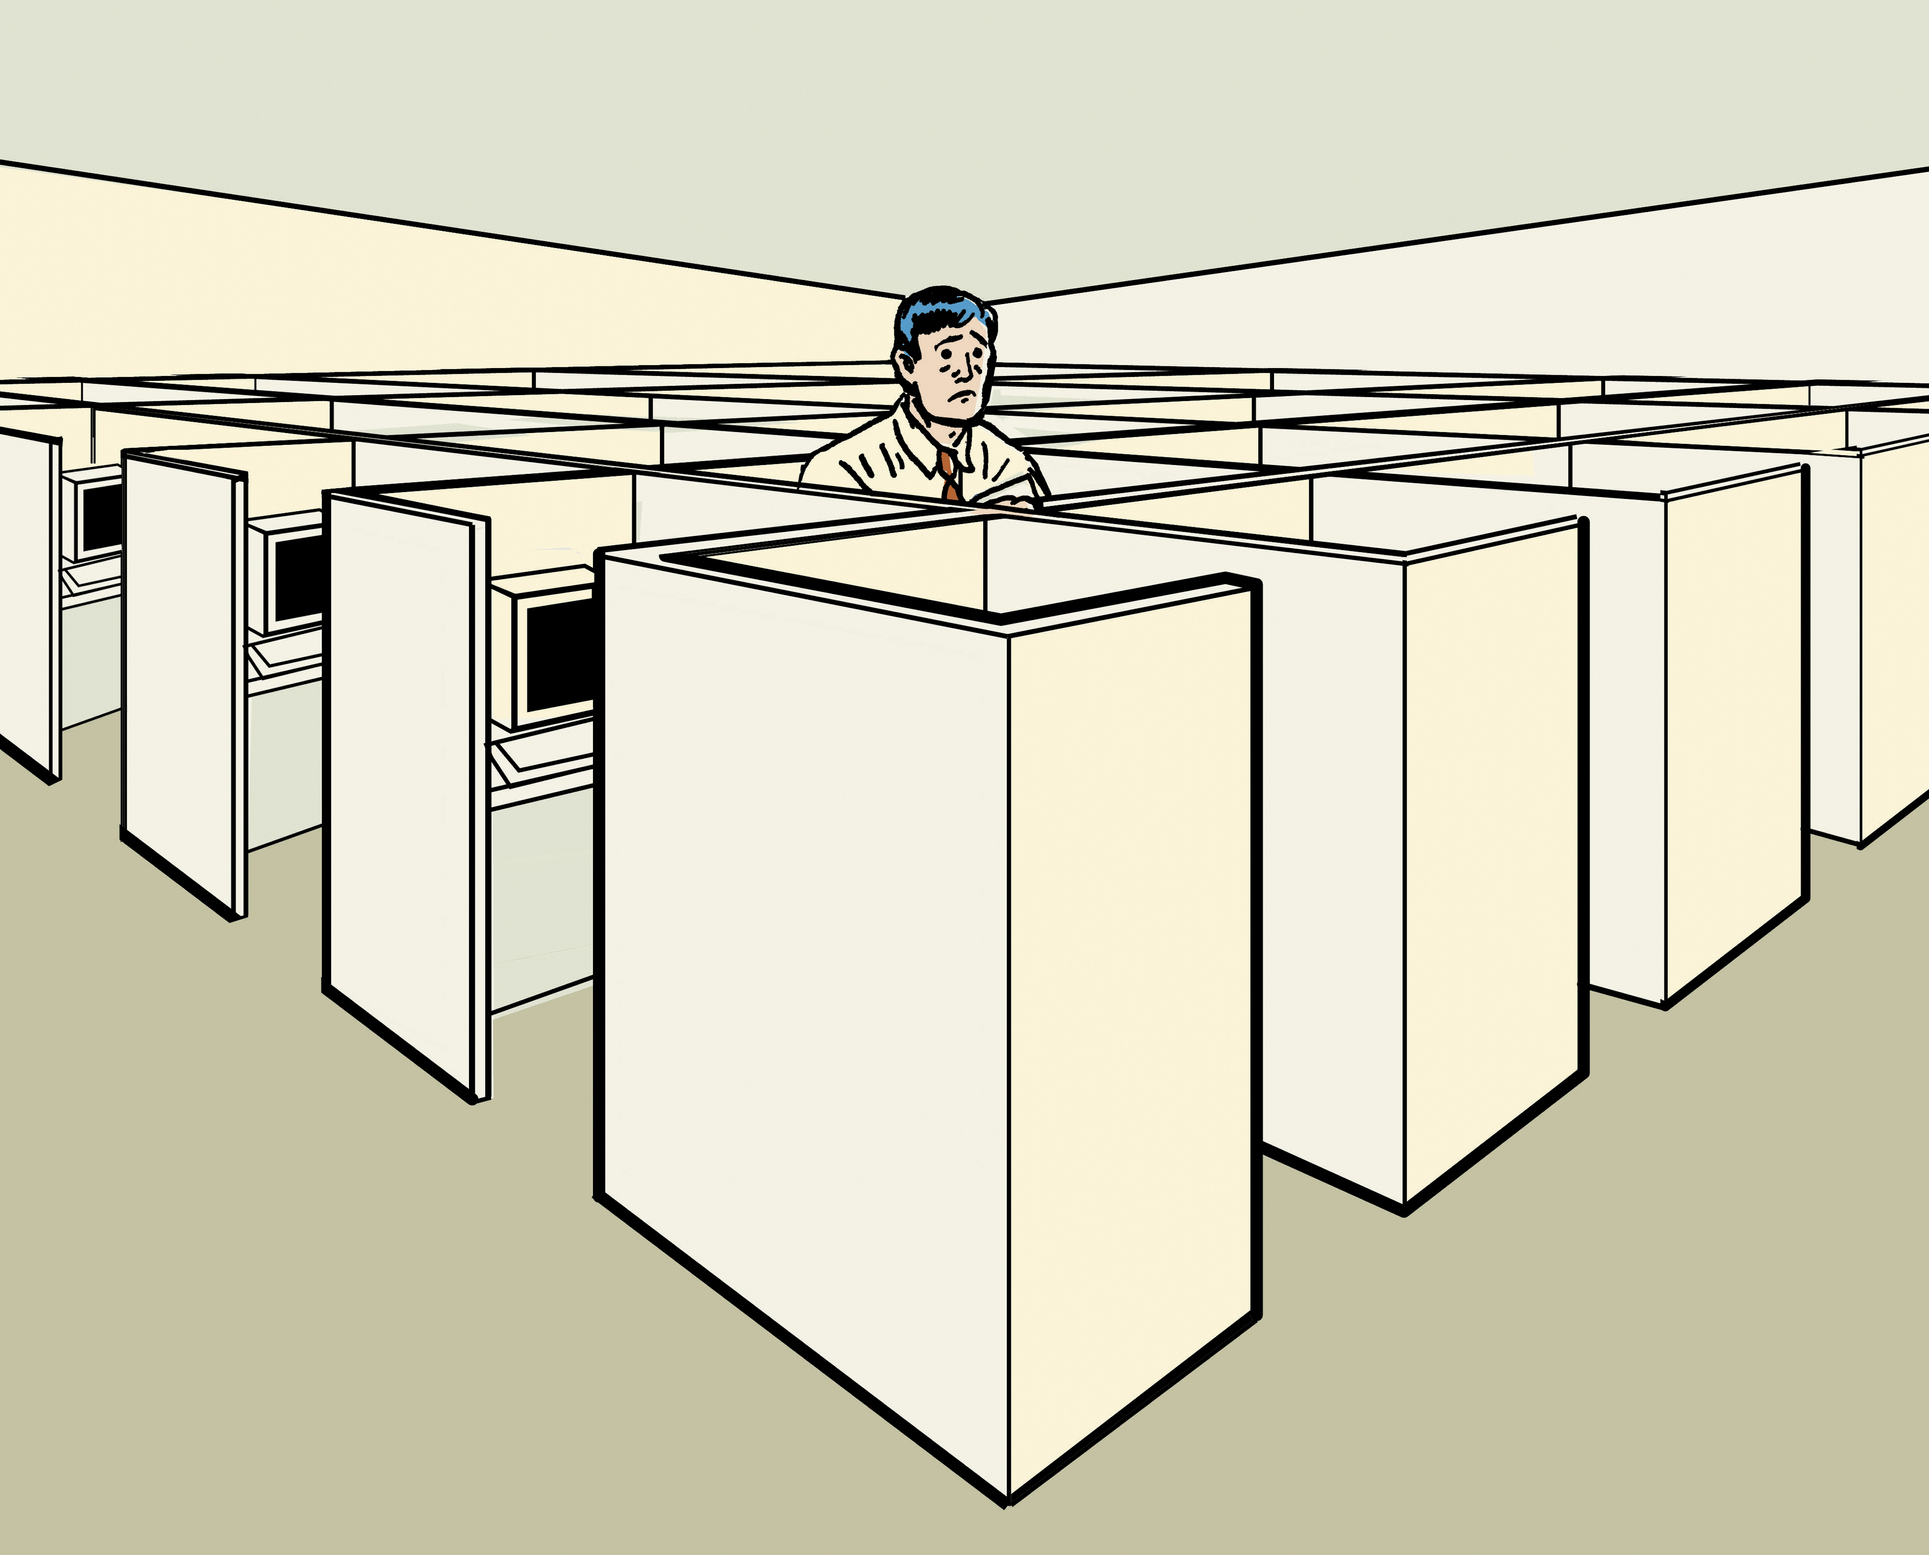 Illustration of a man’s head and shoulders seen amid rows of cubicles. 